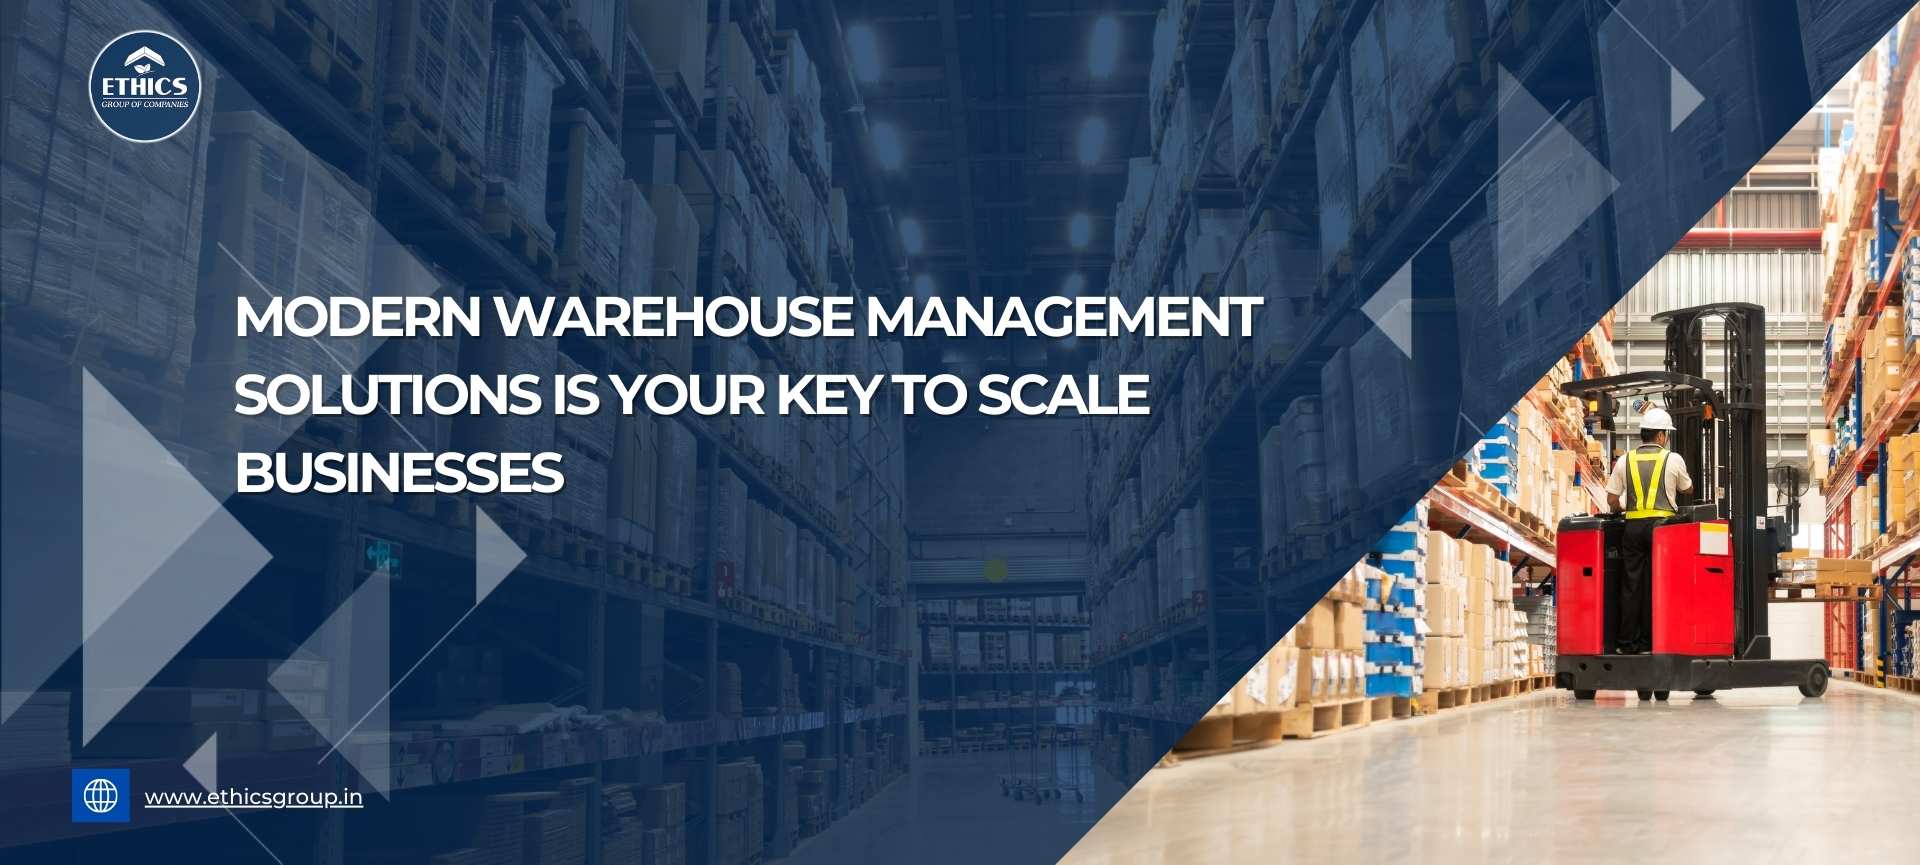 best warehouse management company in India that provides effective warehouse management services